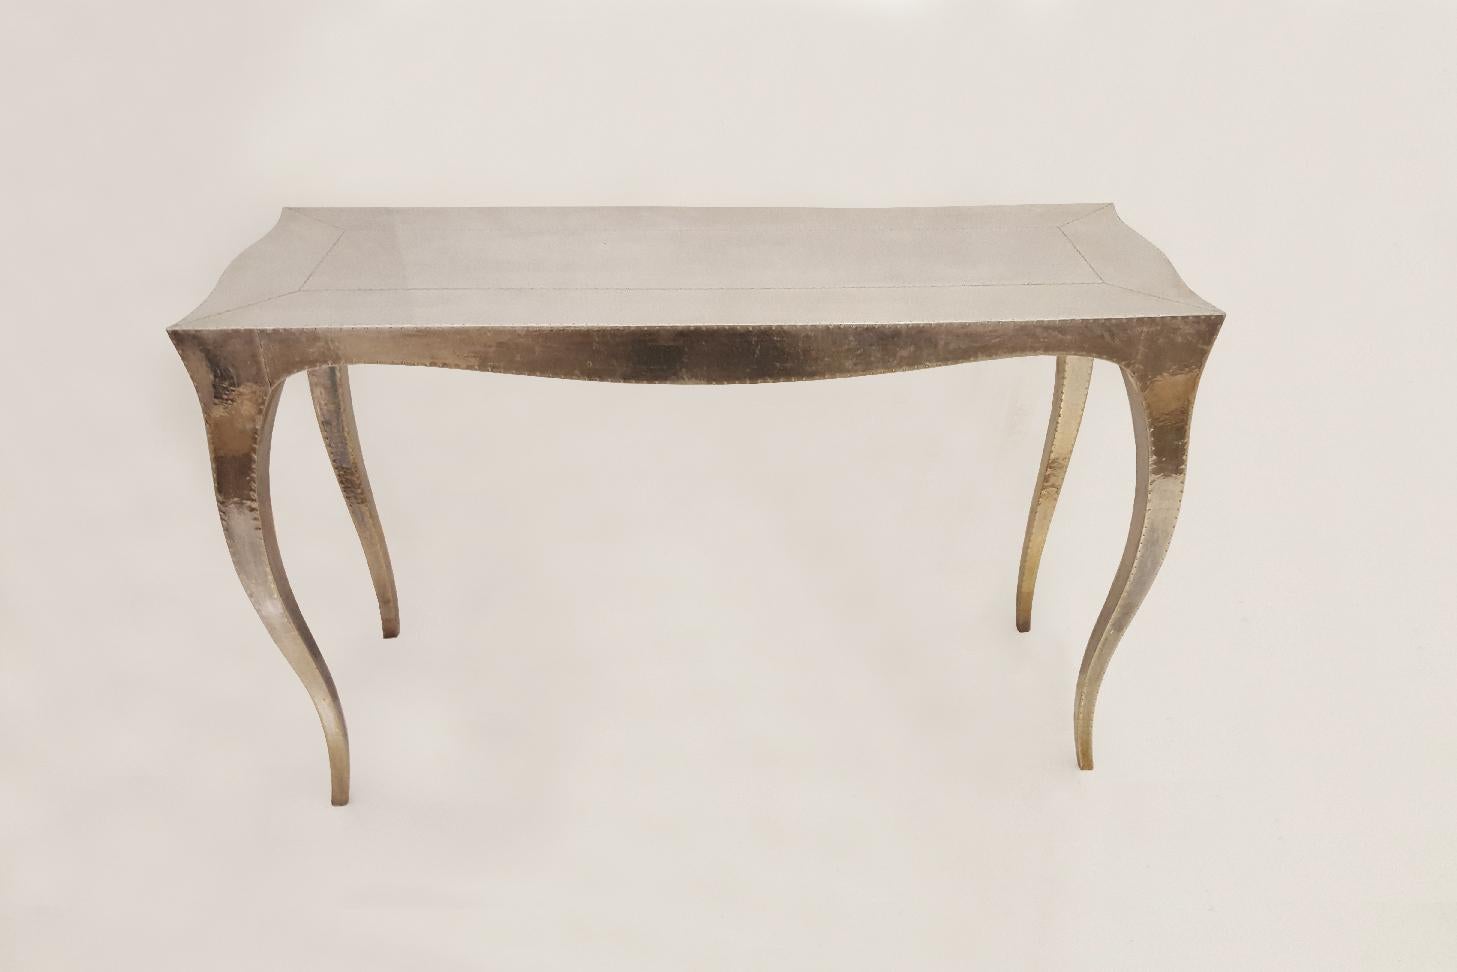 Louise Console Art Deco Conference Tables Mid. Hammered Copper by Paul Mathieu For Sale 5